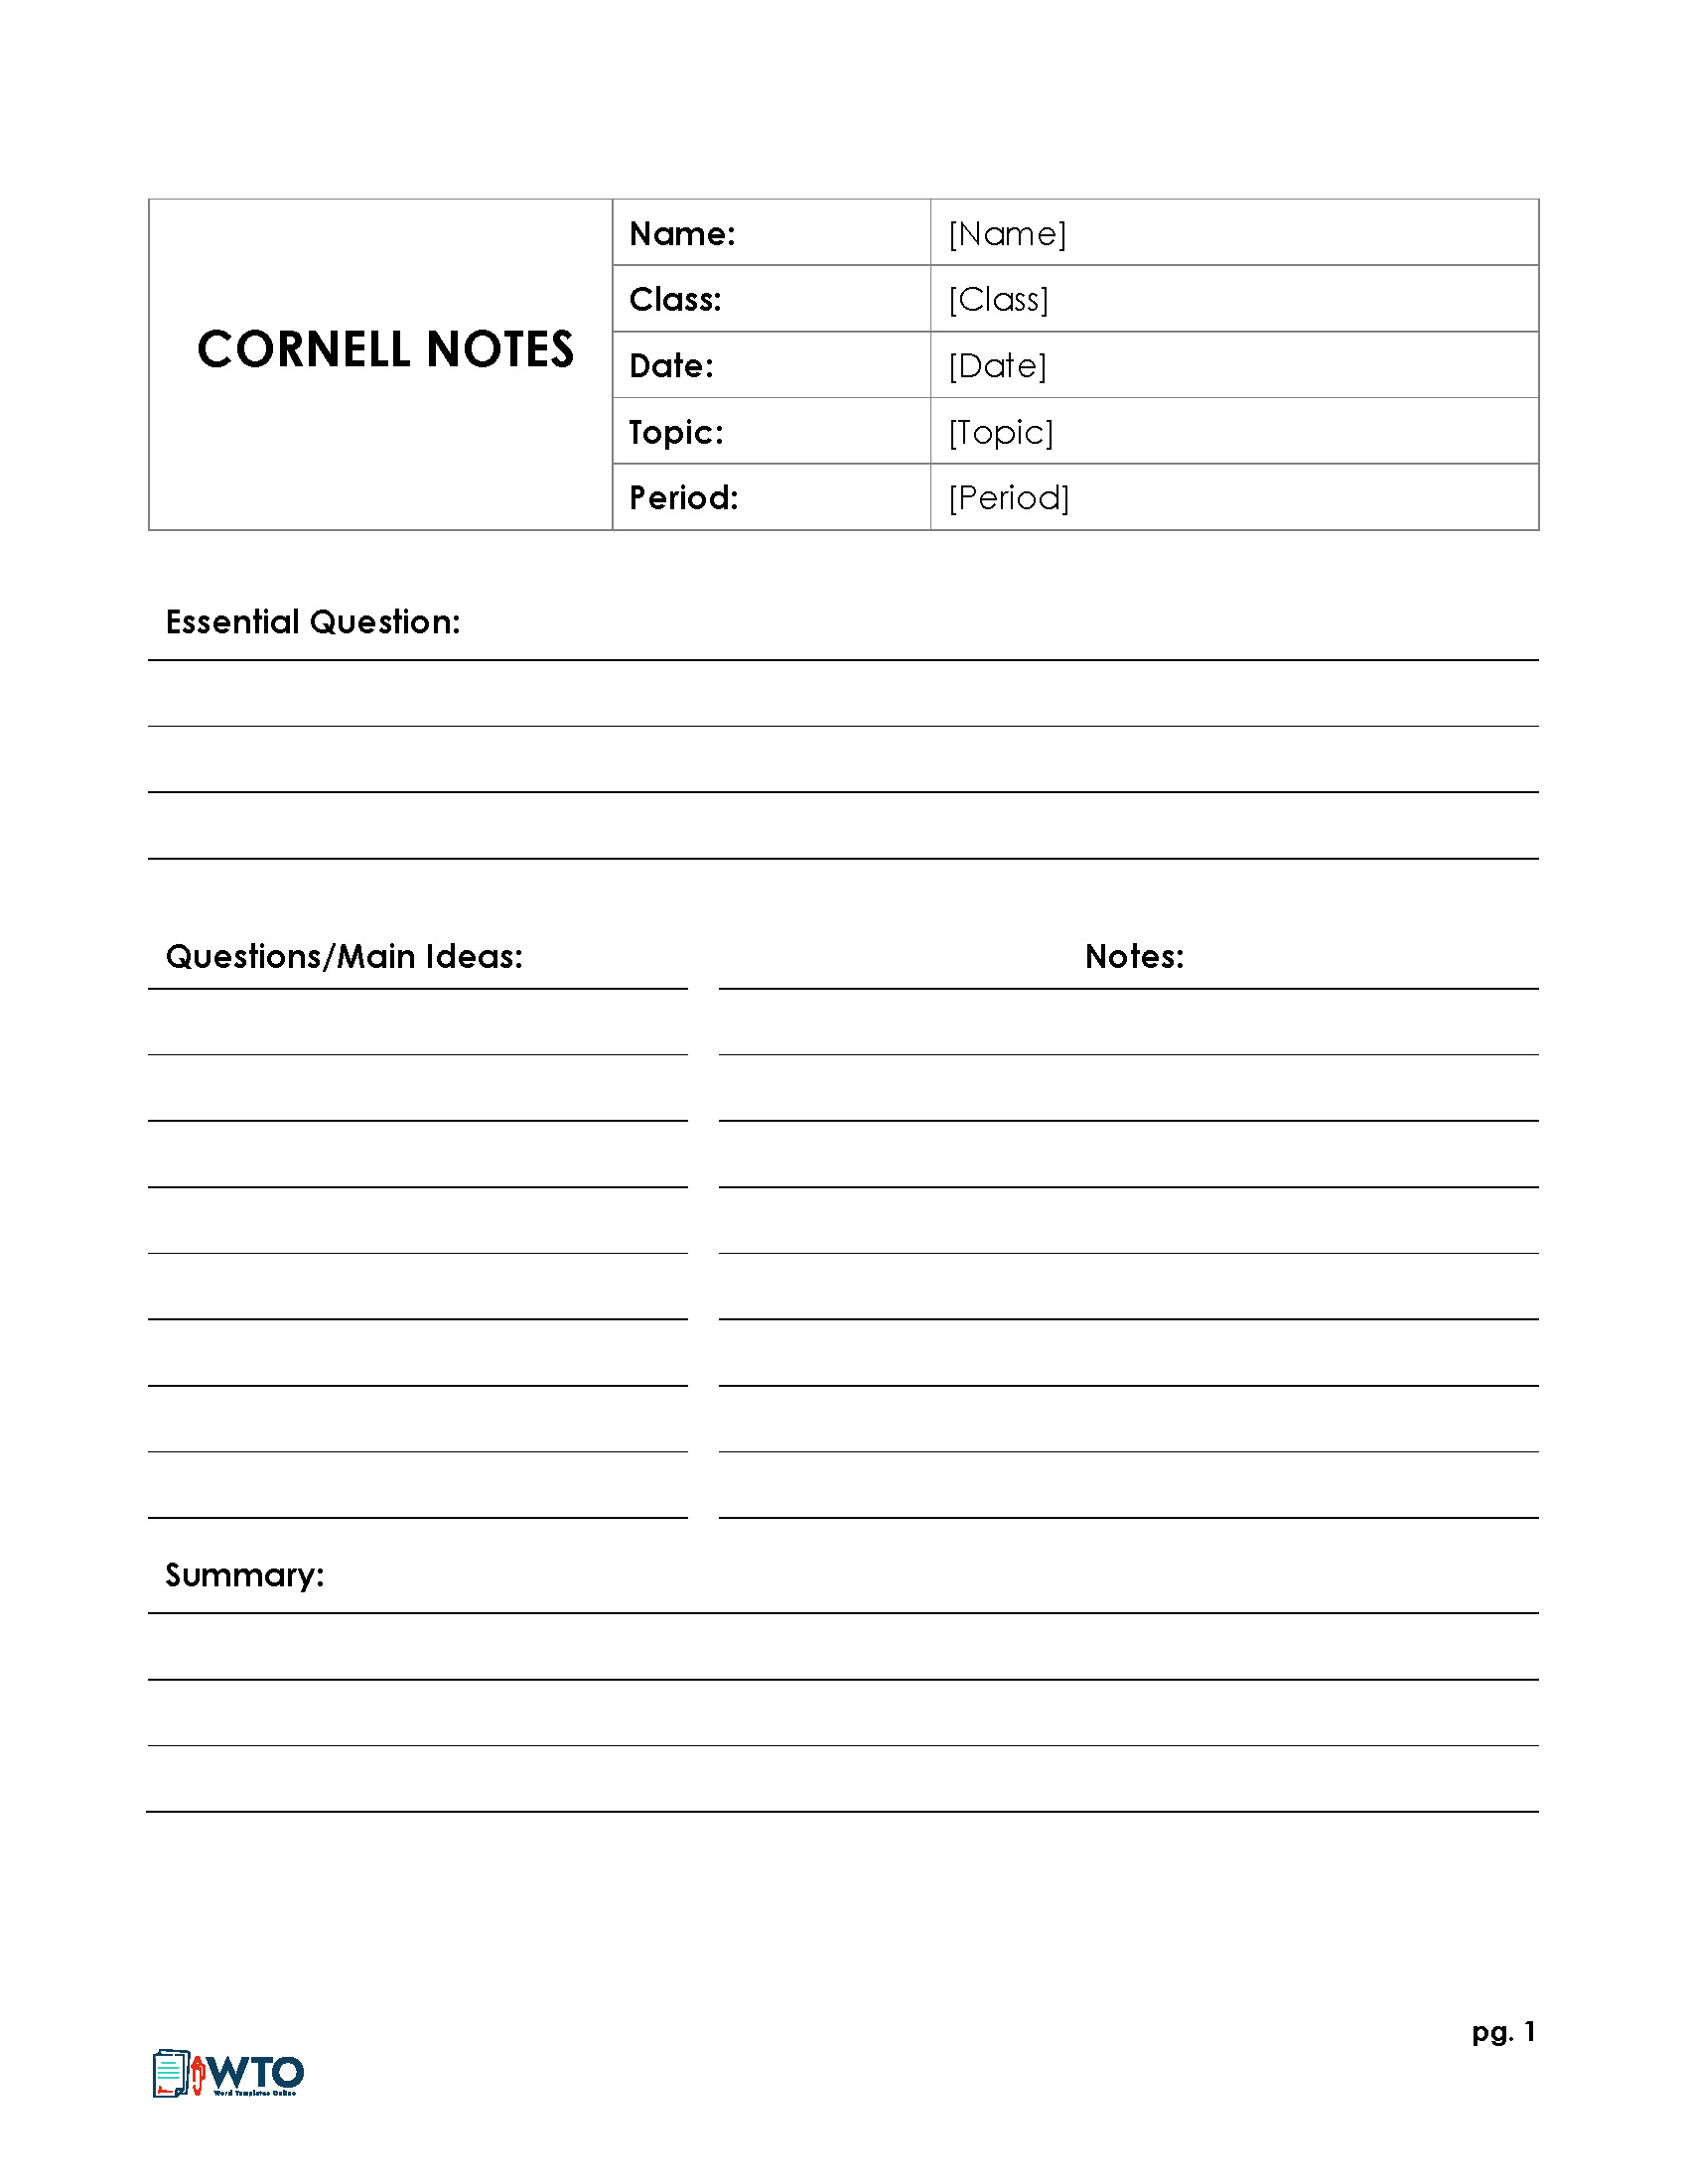 20 Free Cornell Note Templates (Cornell Note Taking Explained) Intended For Cornell Notes Template Doc